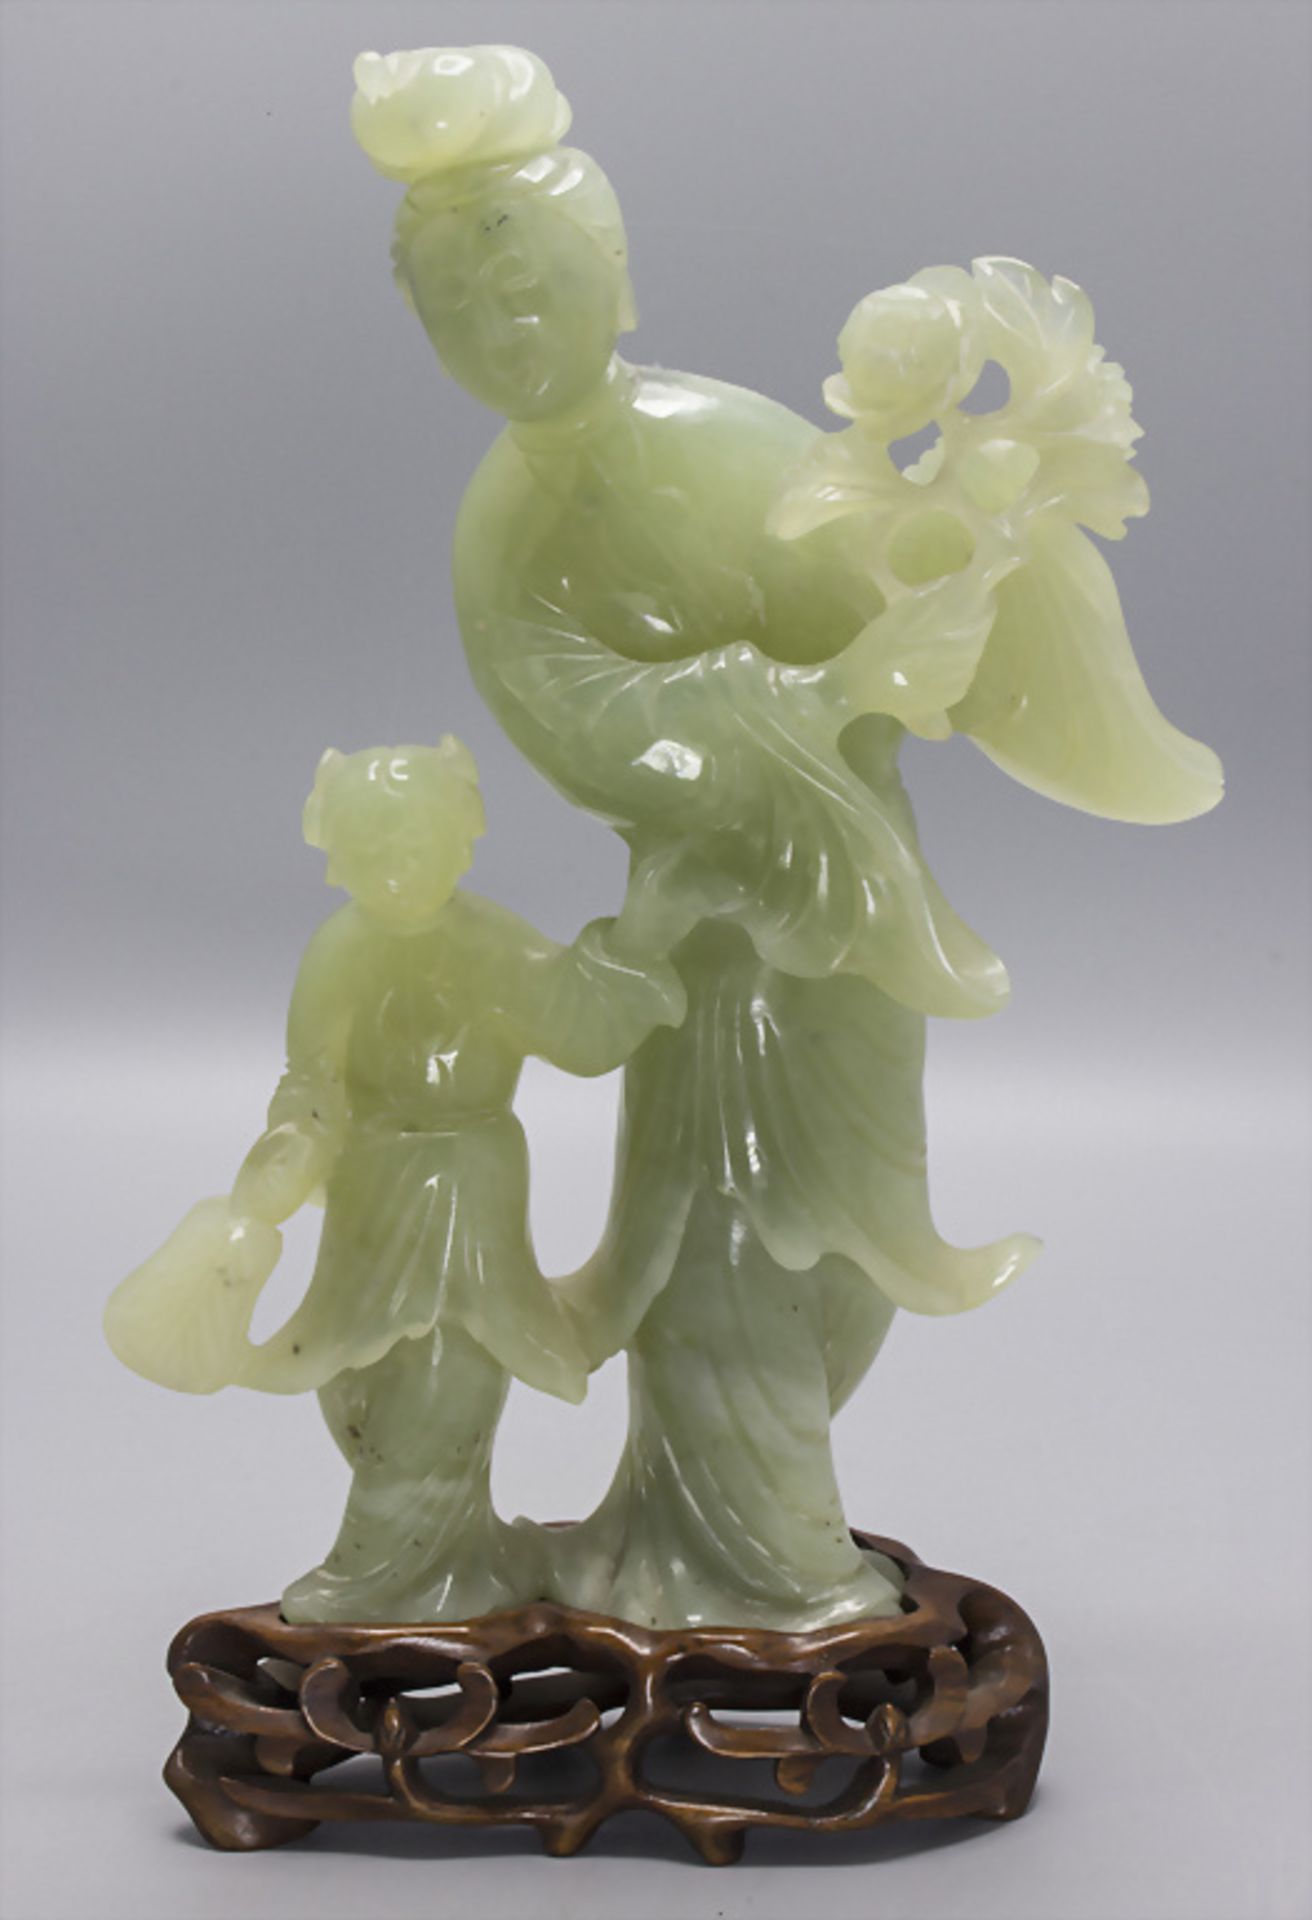 Jade-Doppelfigur einer Mutter mit Kind / A jade double figure of a mother with a child, China, ...